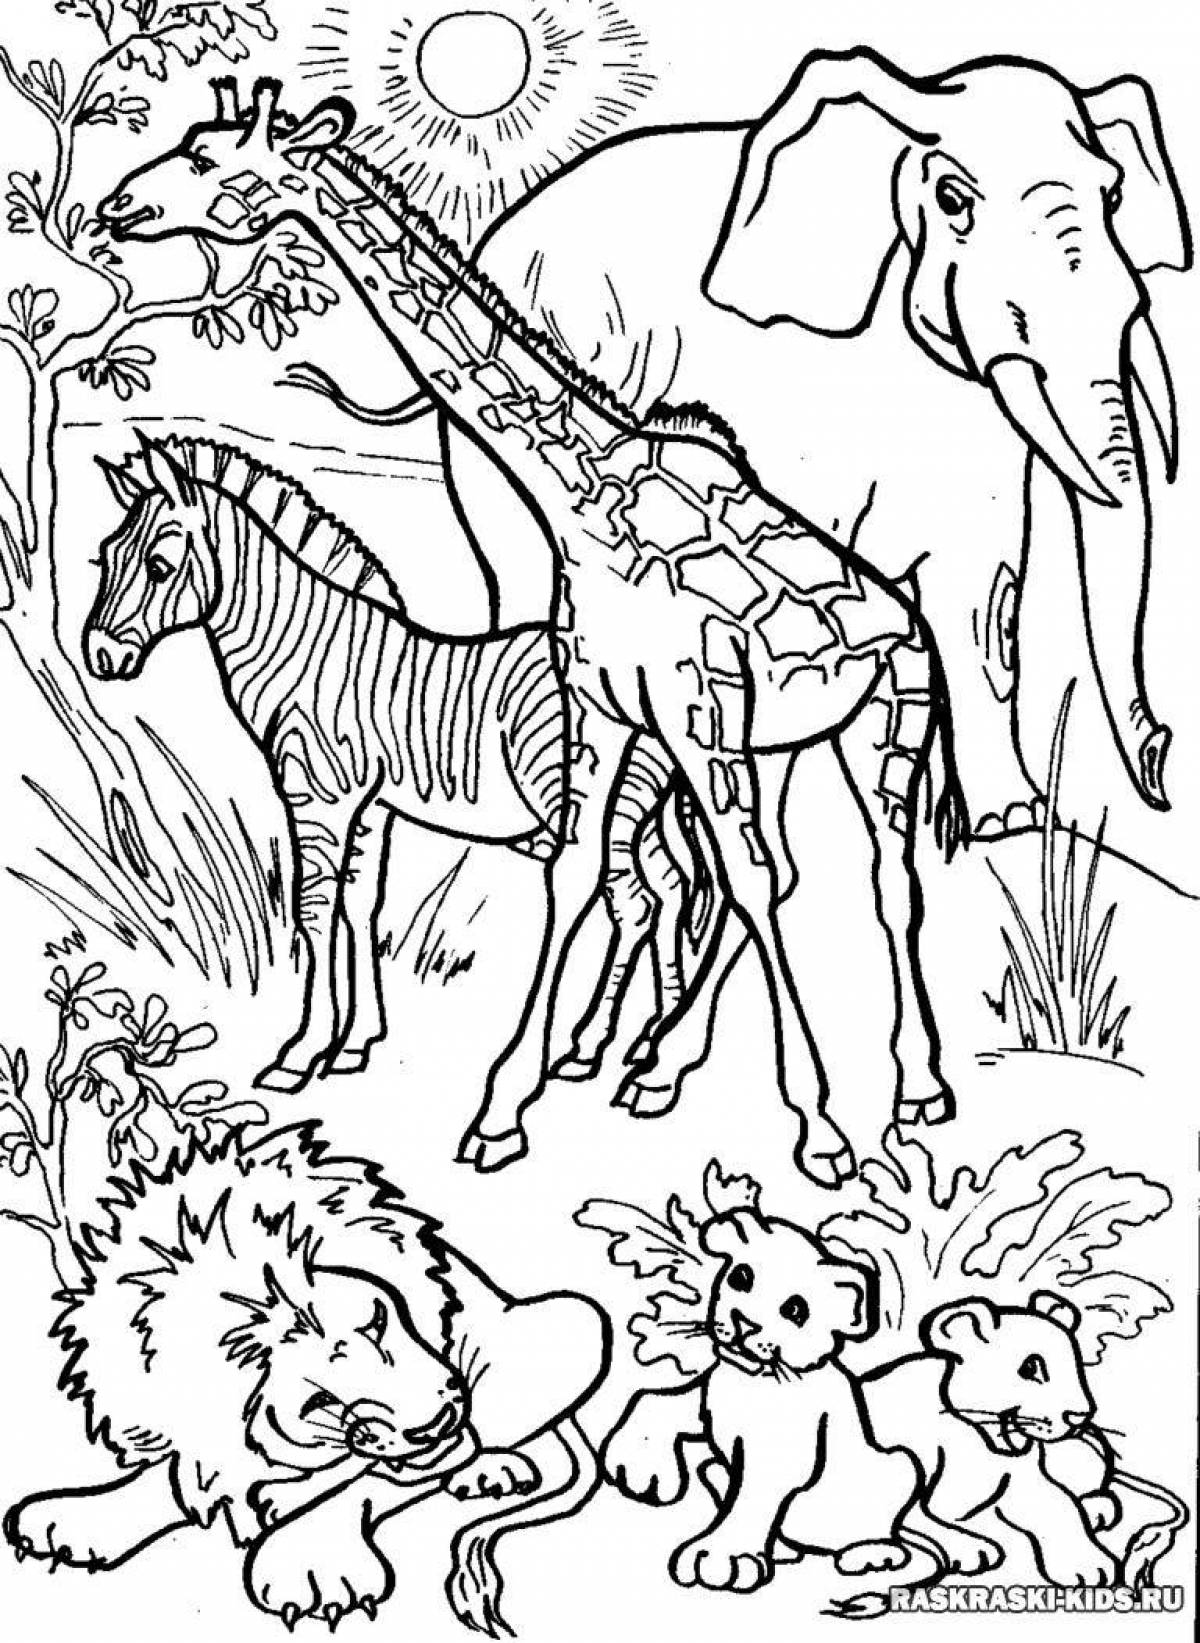 An unforgettable coloring book of African animals for children 5-7 years old